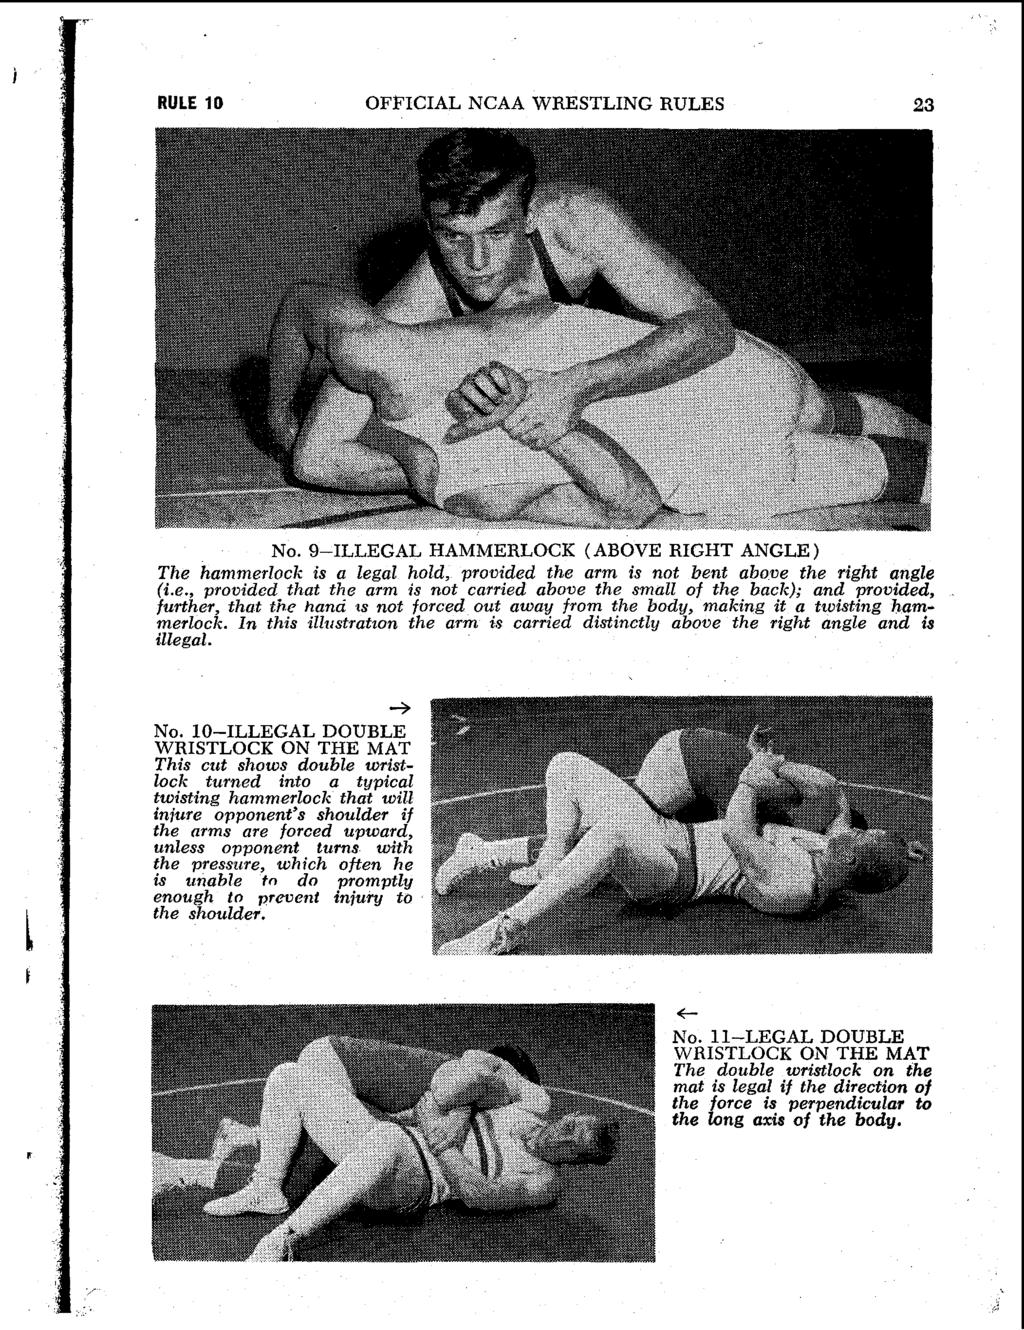 RULE 10 OFFICIAL NCAA WRESTLING RULES No. 9-ILLEGAL HAMMERLOCK (ABOVE RIGHT ANGLE) The hammerlock is a legal hold, provided the arm is not bent above the right angle (LC.